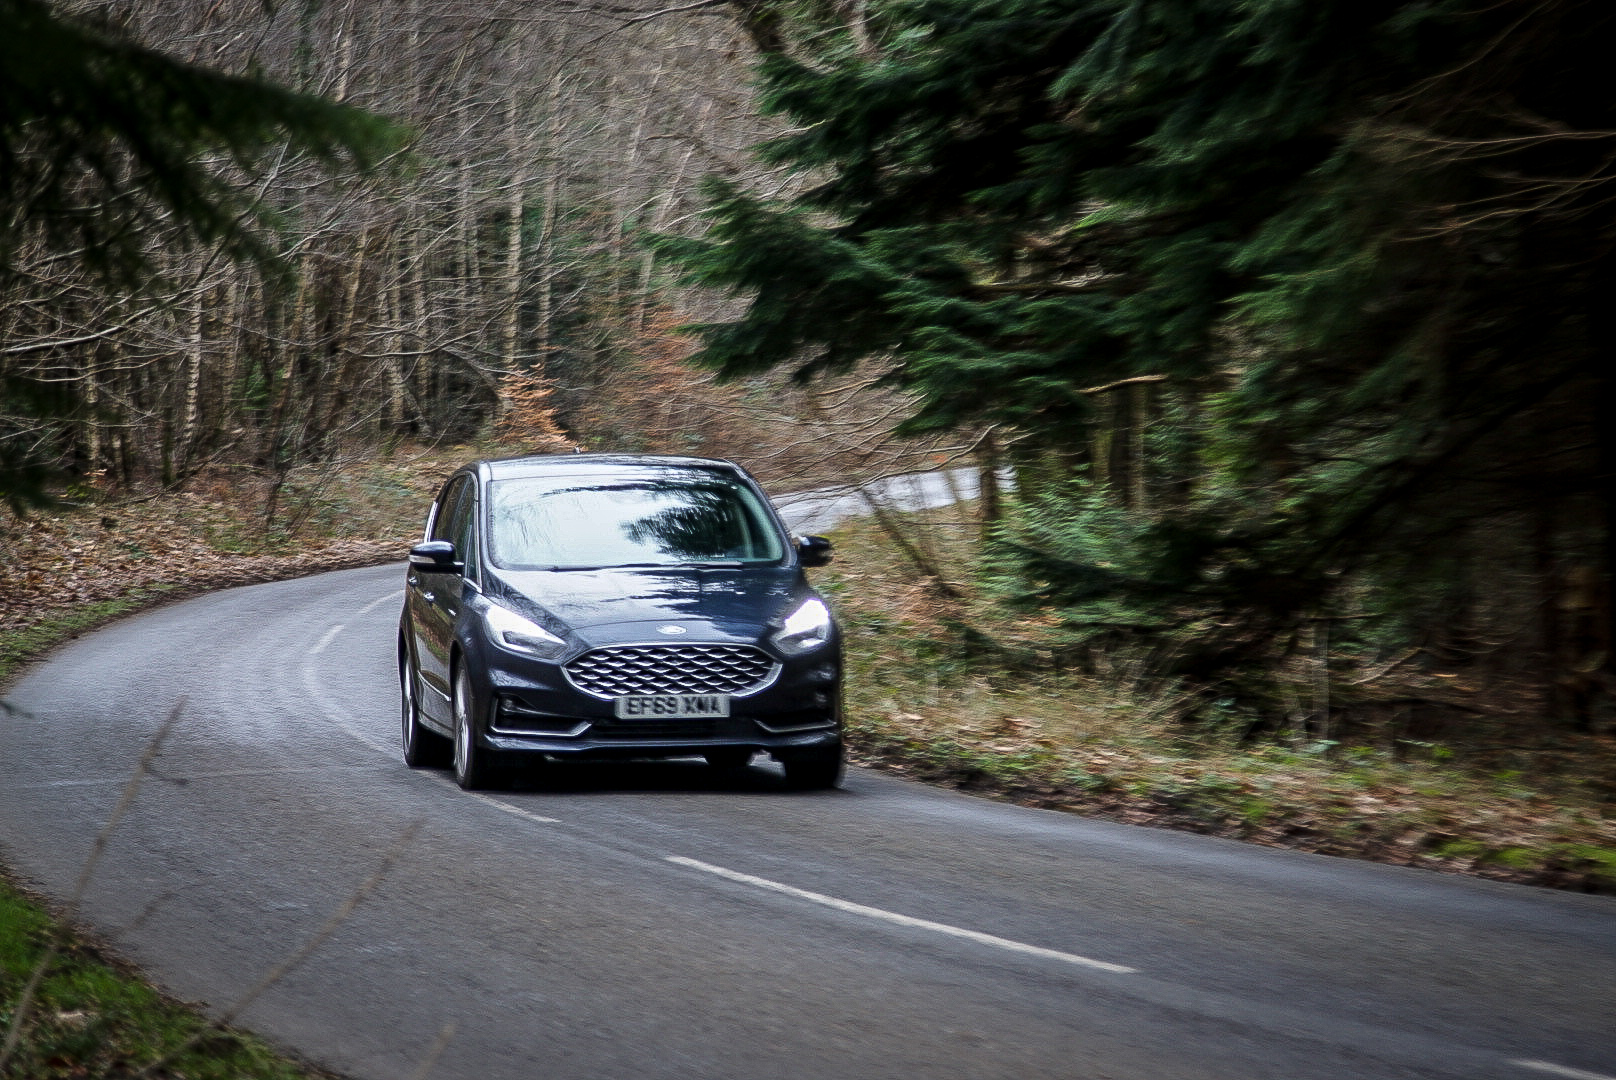 The S-Max corners surprisingly keenly